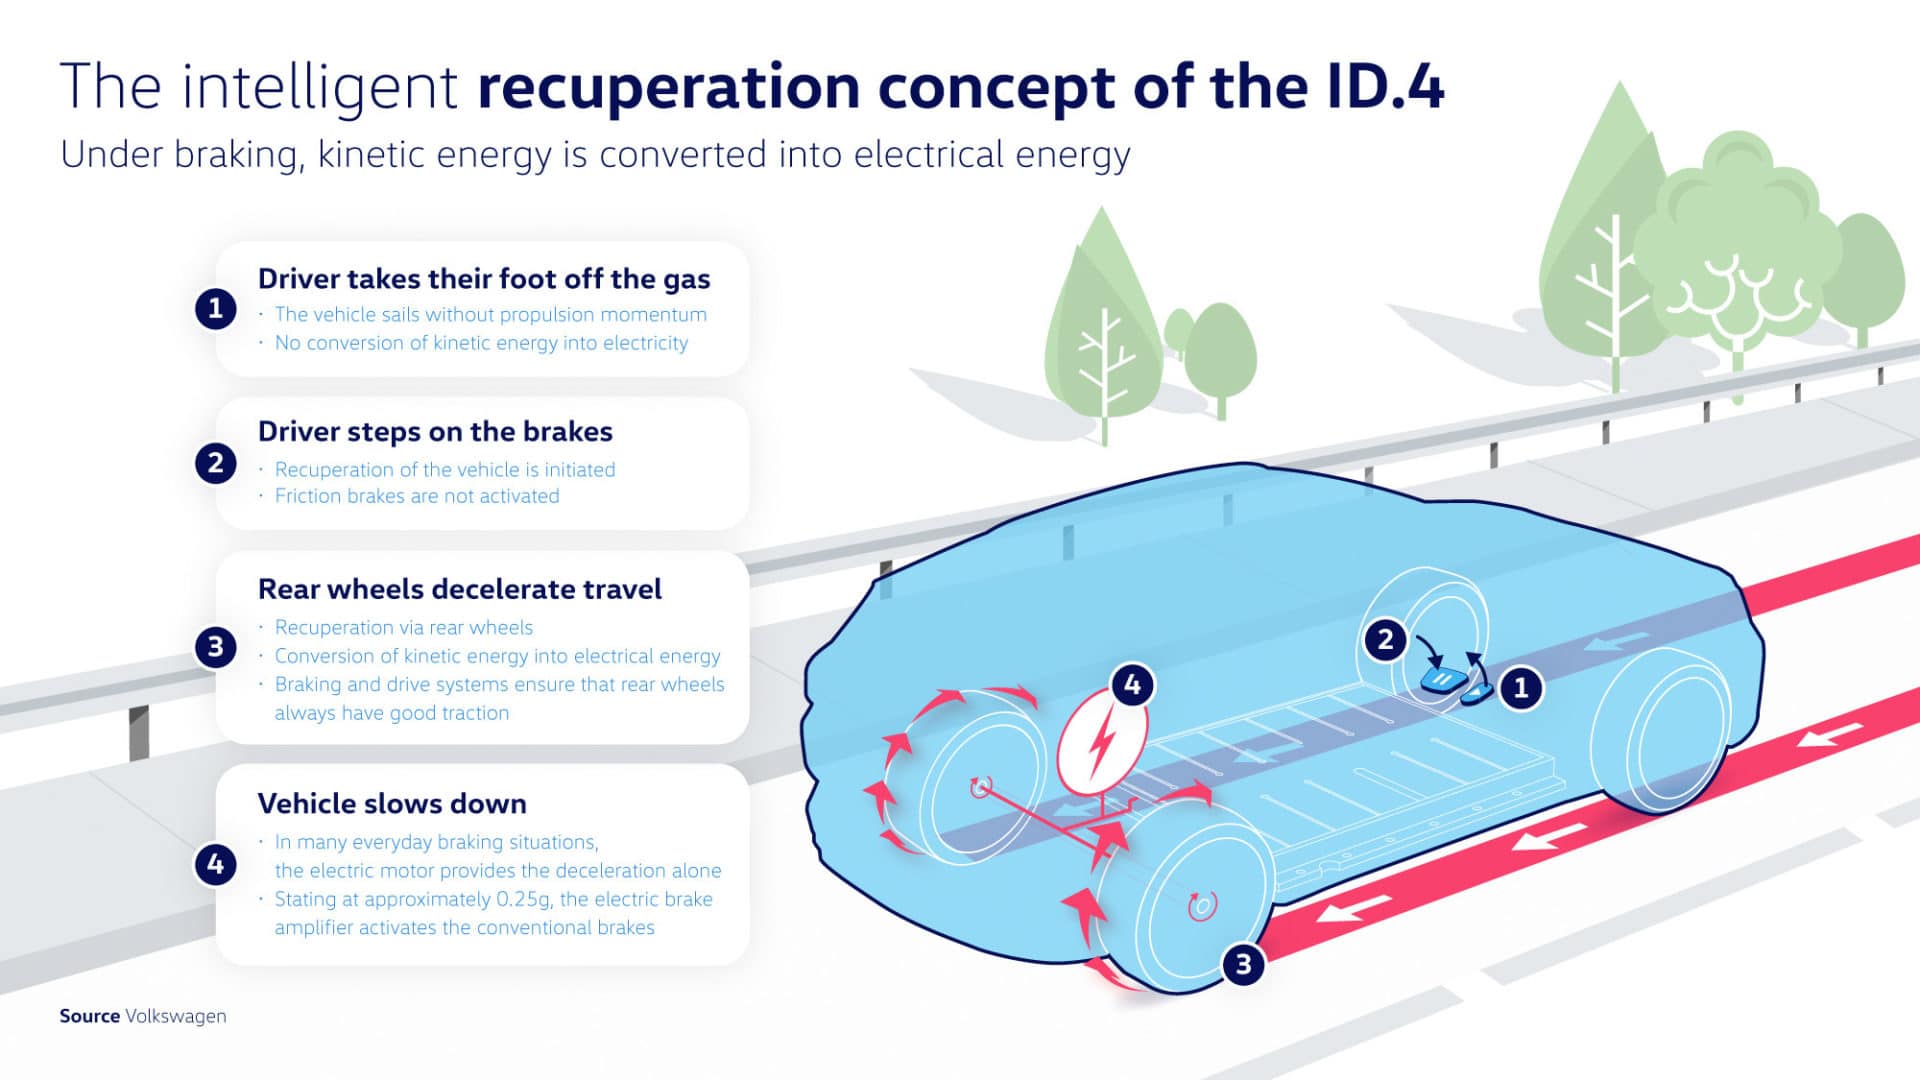 Intelligent regen braking allows the VW ID.4 to coast when the driver removes his/her foot from the accelerator